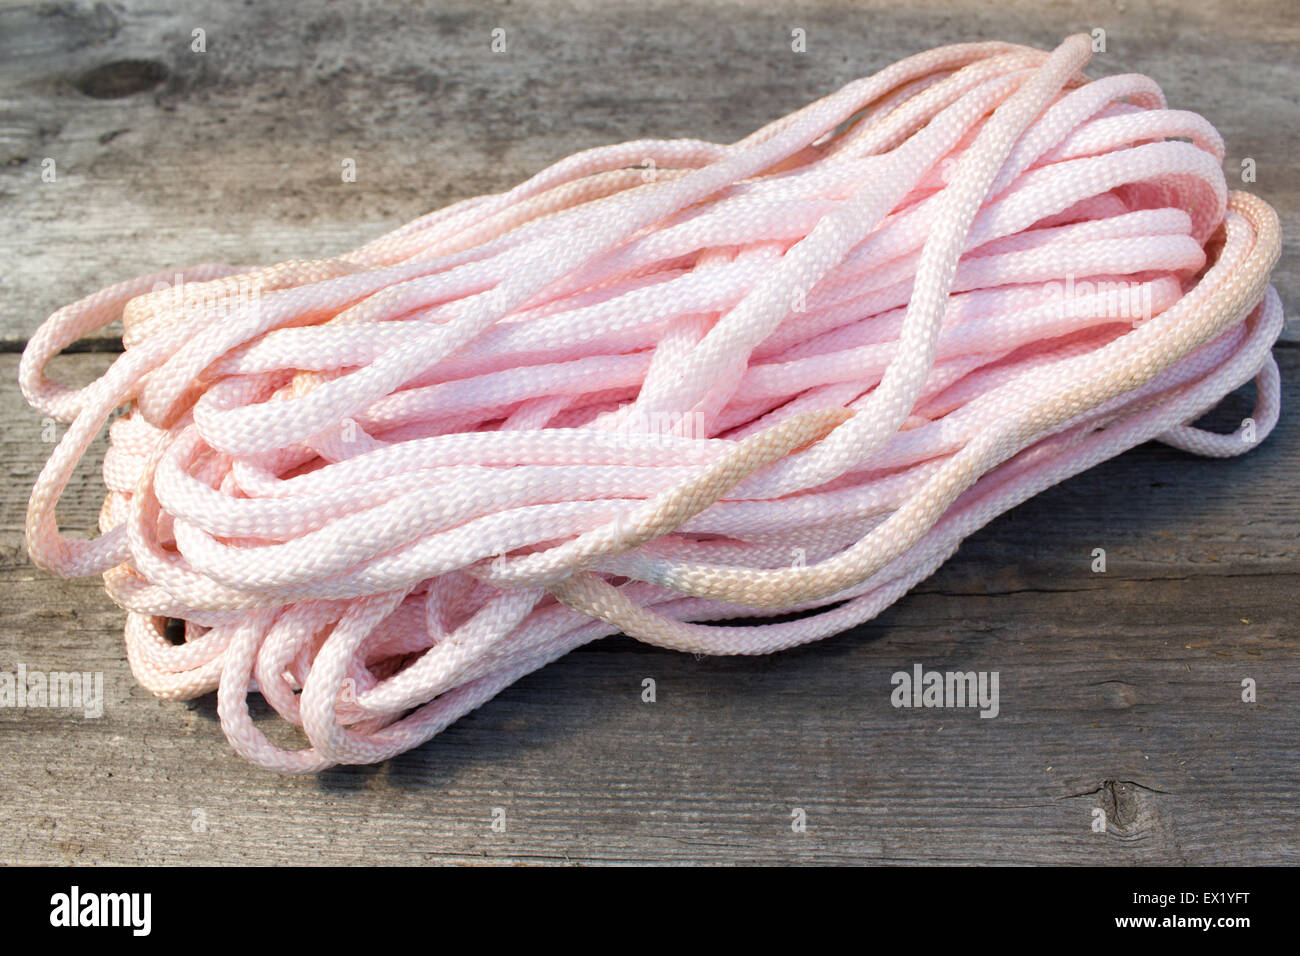 White Rope and Textured Wood, Coil of white rope set against highly textured wood. Stock Photo